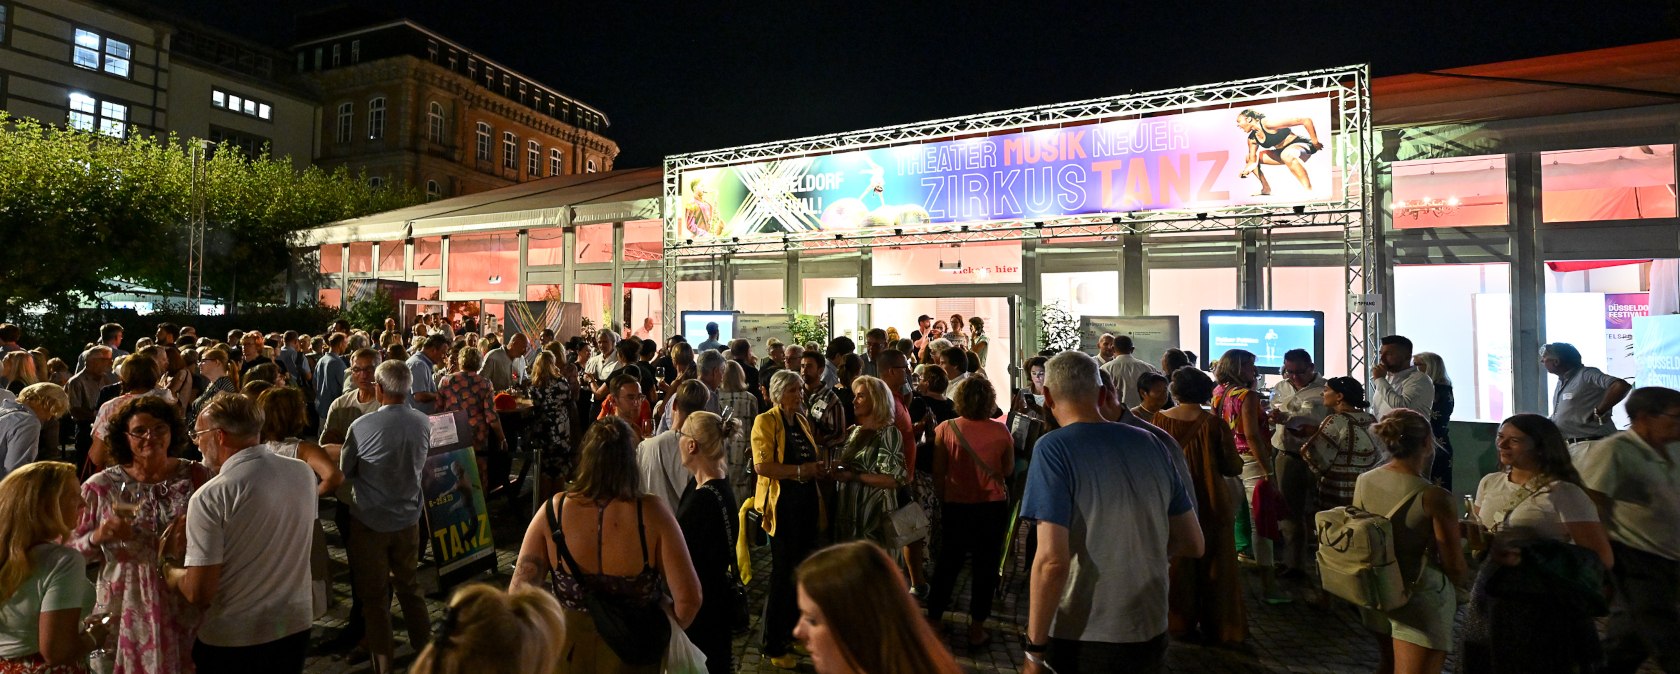 The number of guests at events is large, © Michael Lübke, Düsseldorf Festival